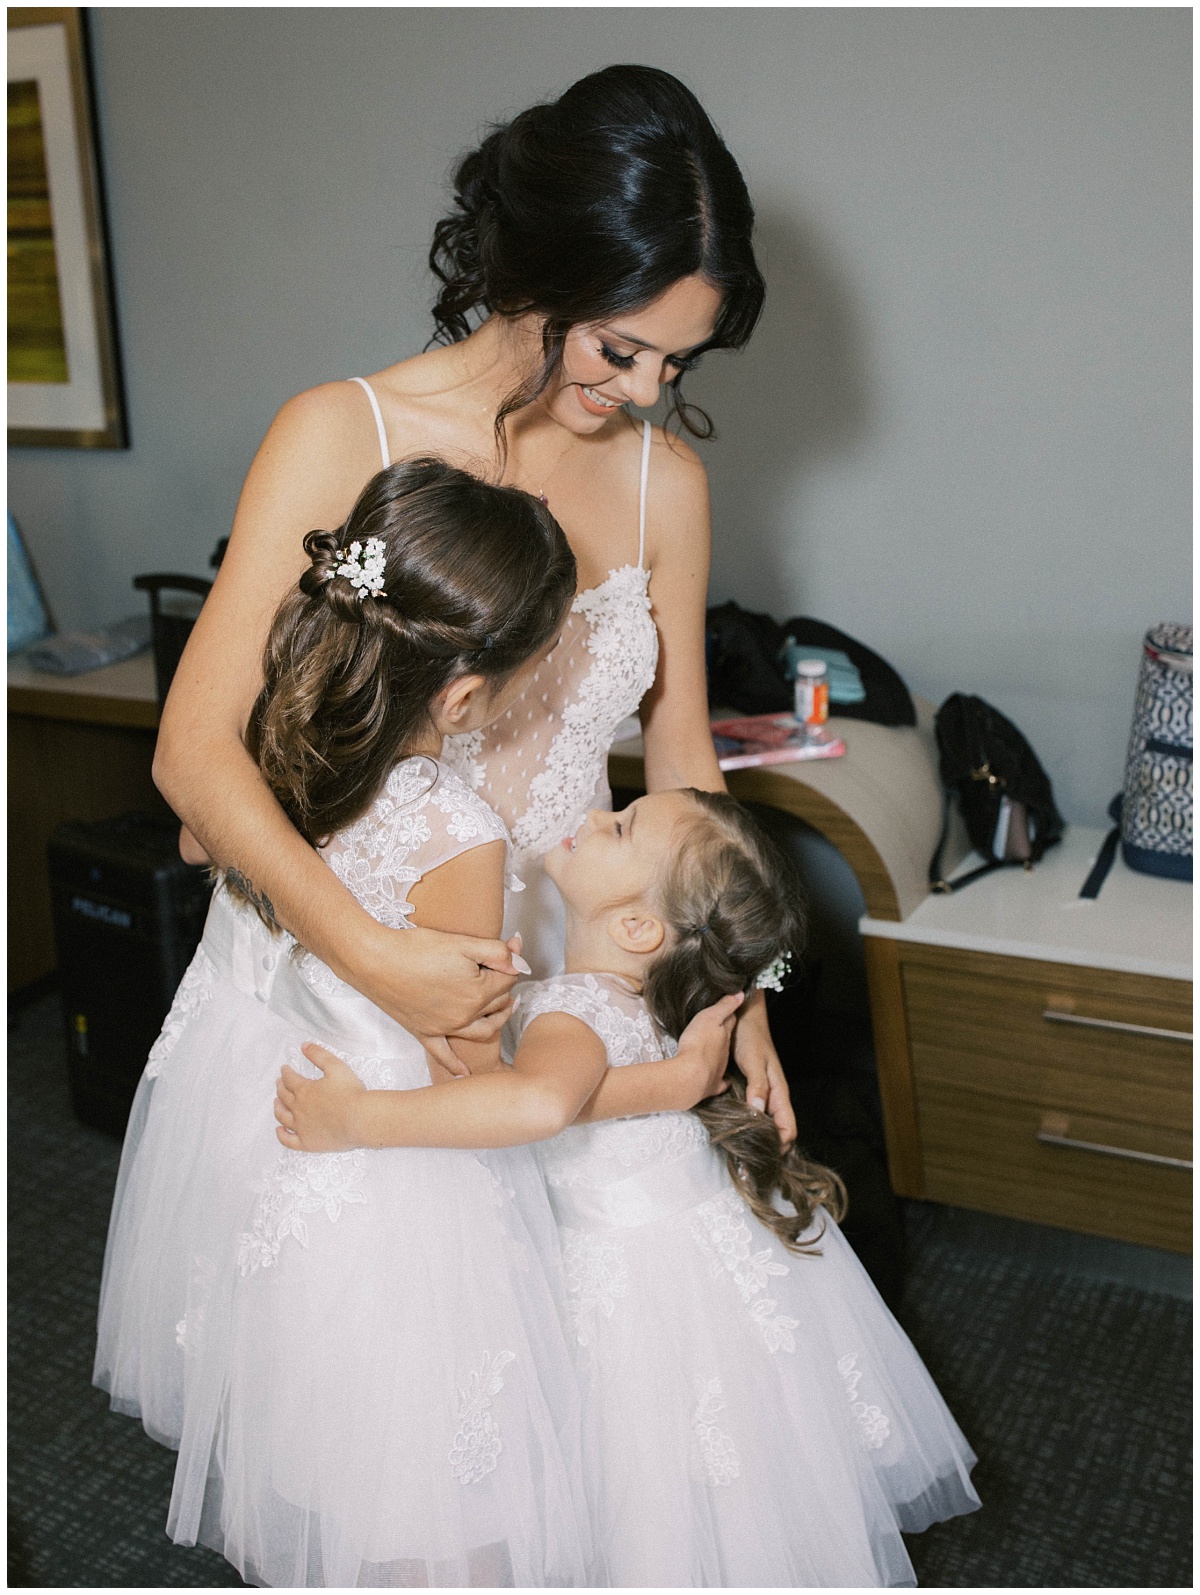 Candid Moments of Bride Getting Ready